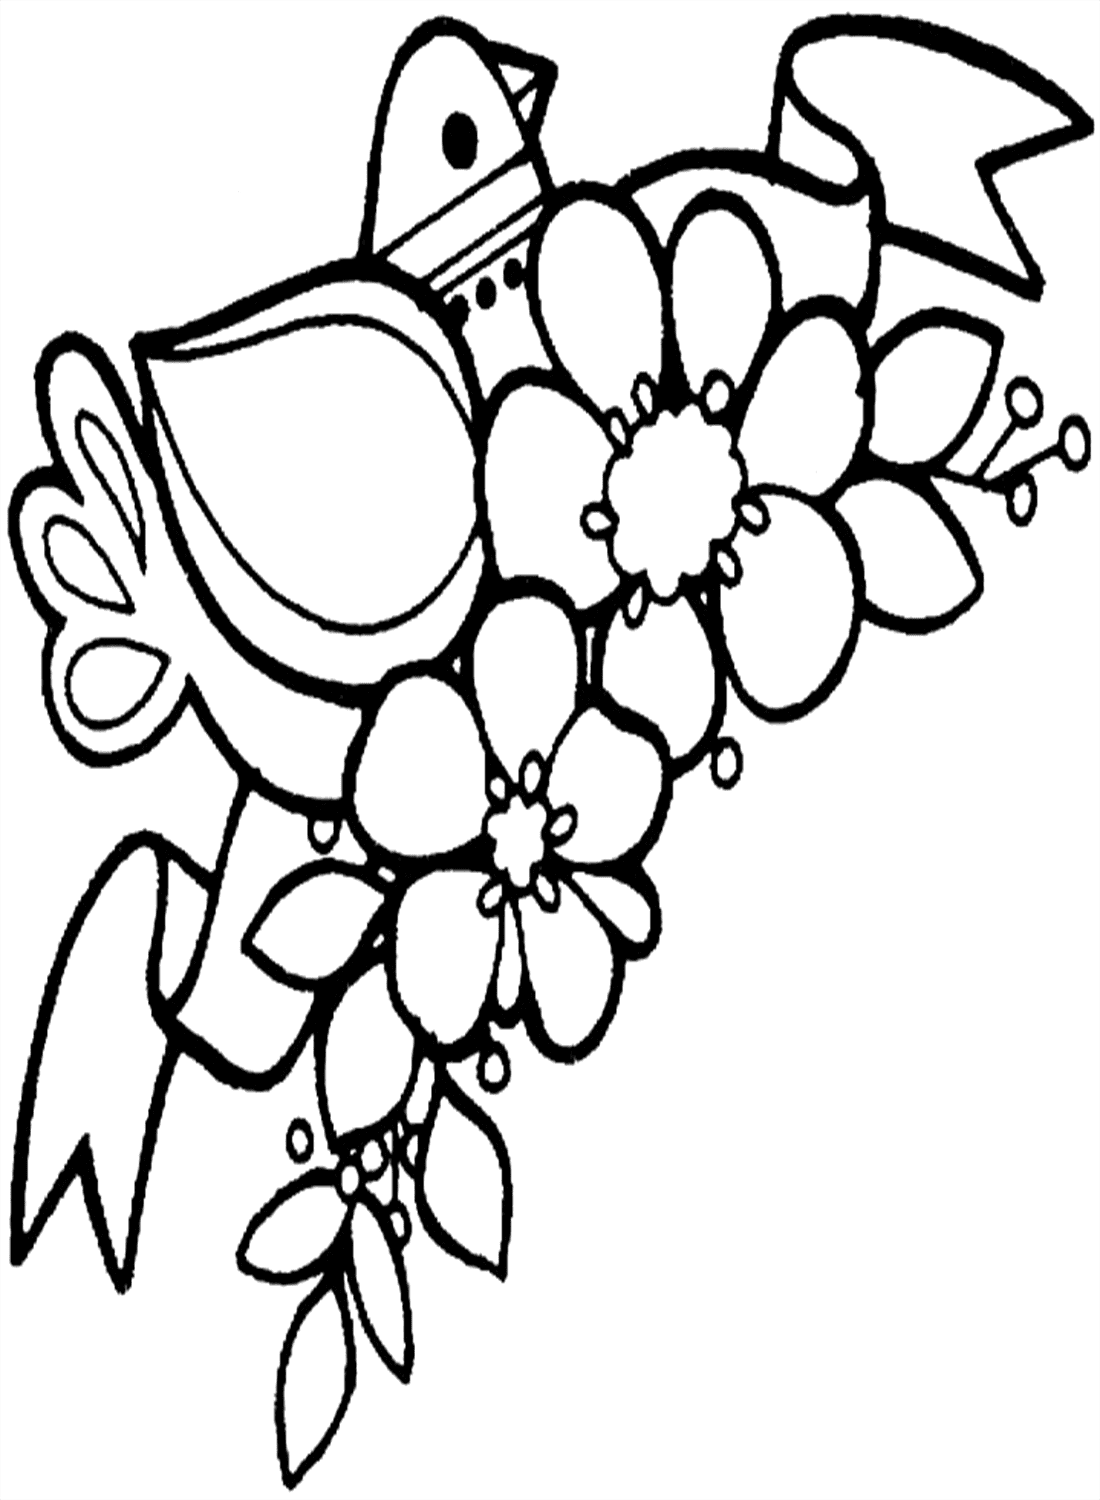 A Bird and Flowering Branch Coloring Page